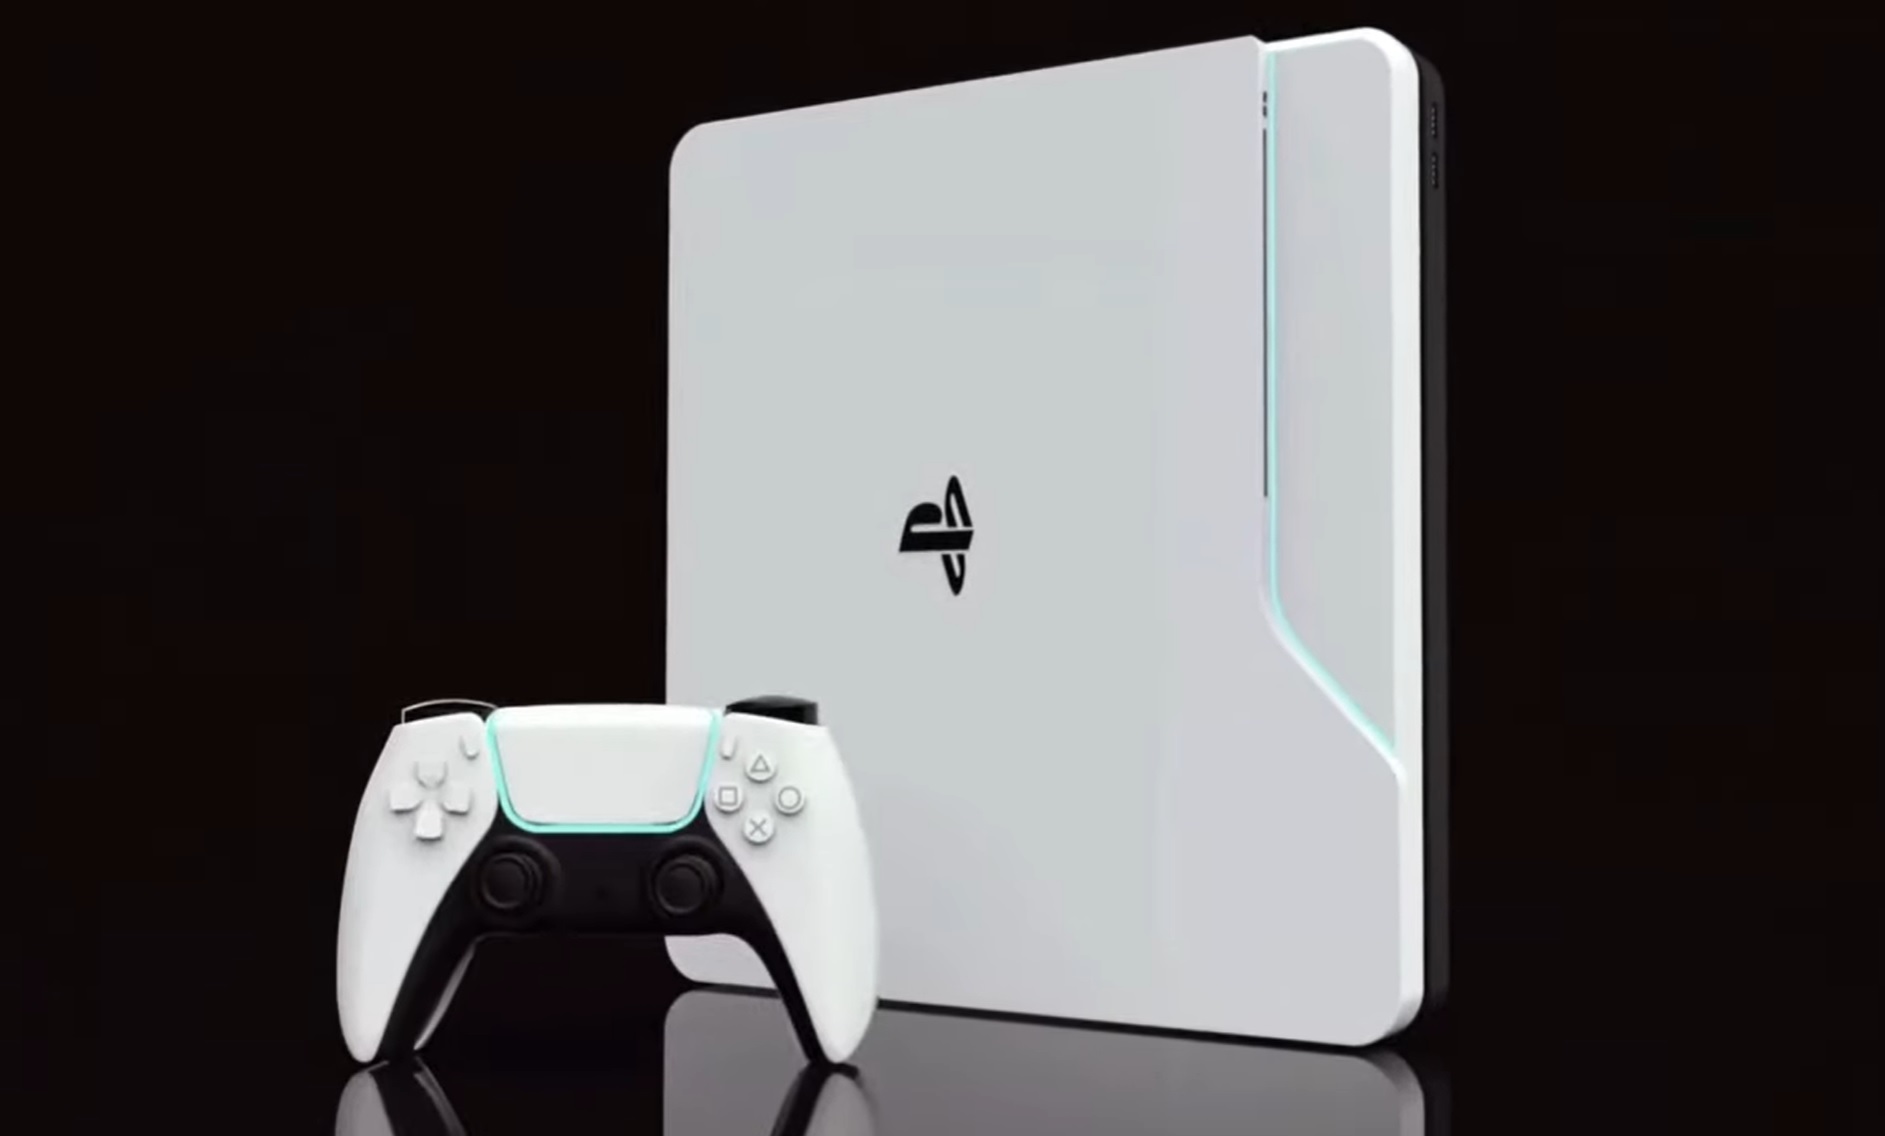 Radical Sony PlayStation 5 Pro redesign appears with the PS5 Slim